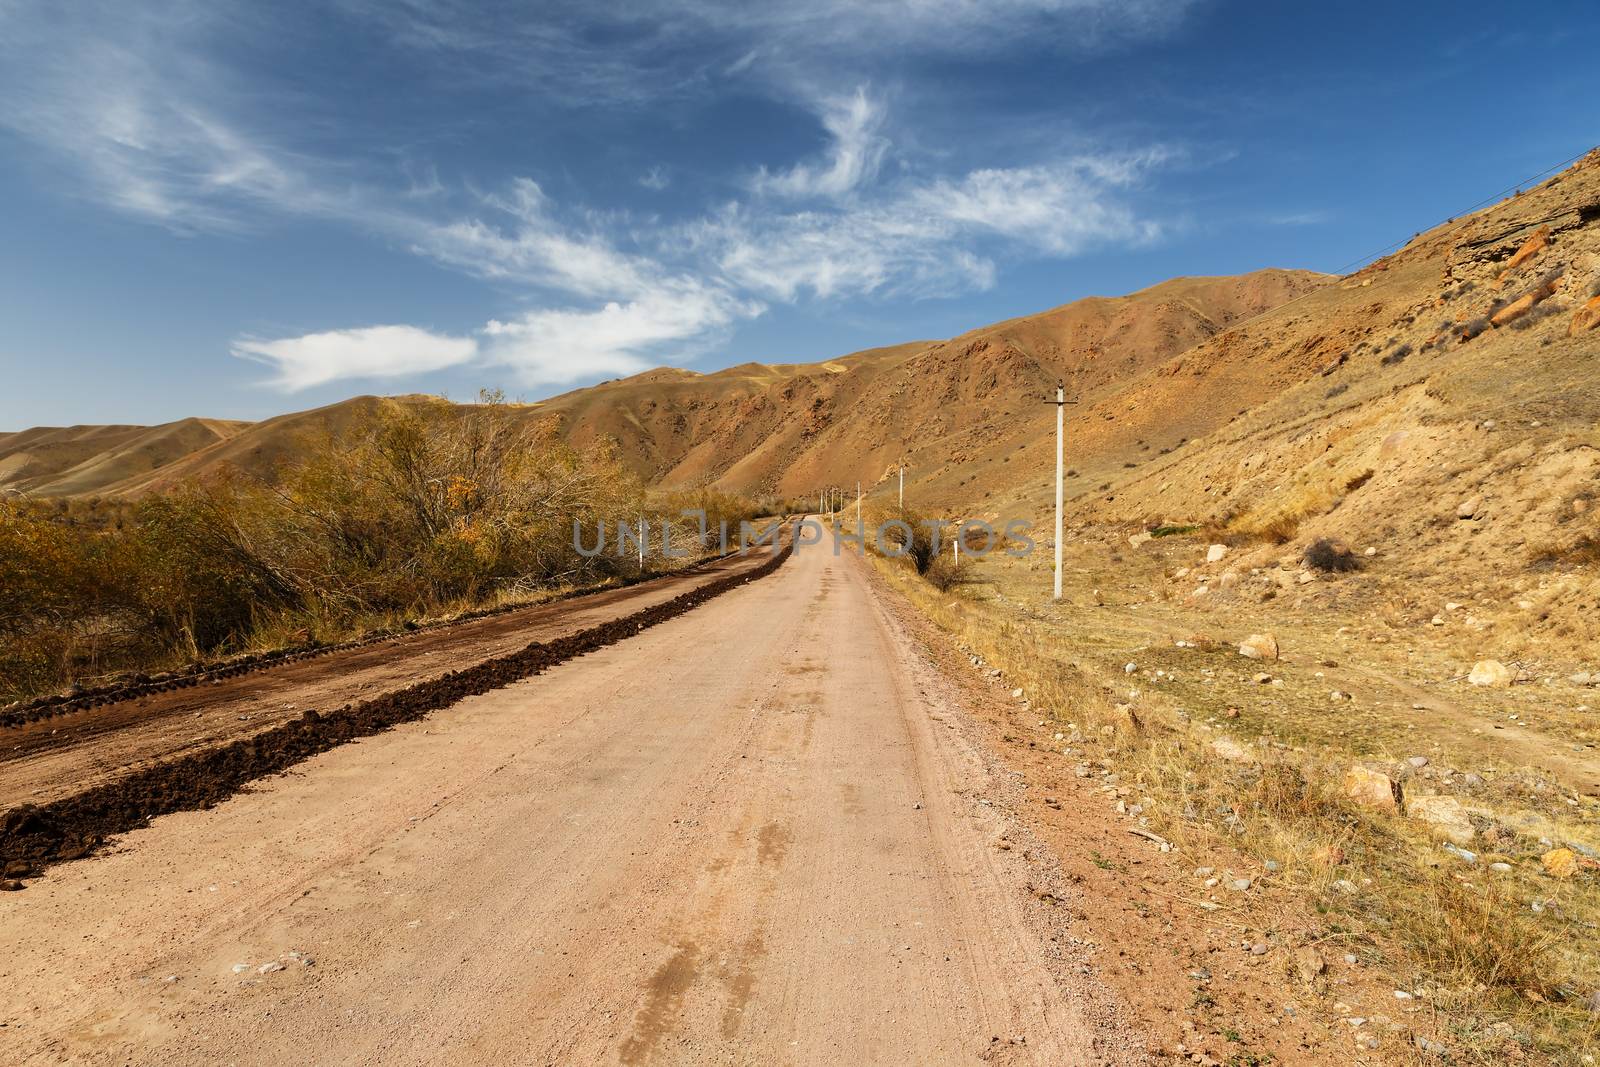 A 367 highway passing in the Chui region of Kyrgyzstan, near the village of Kojomkul